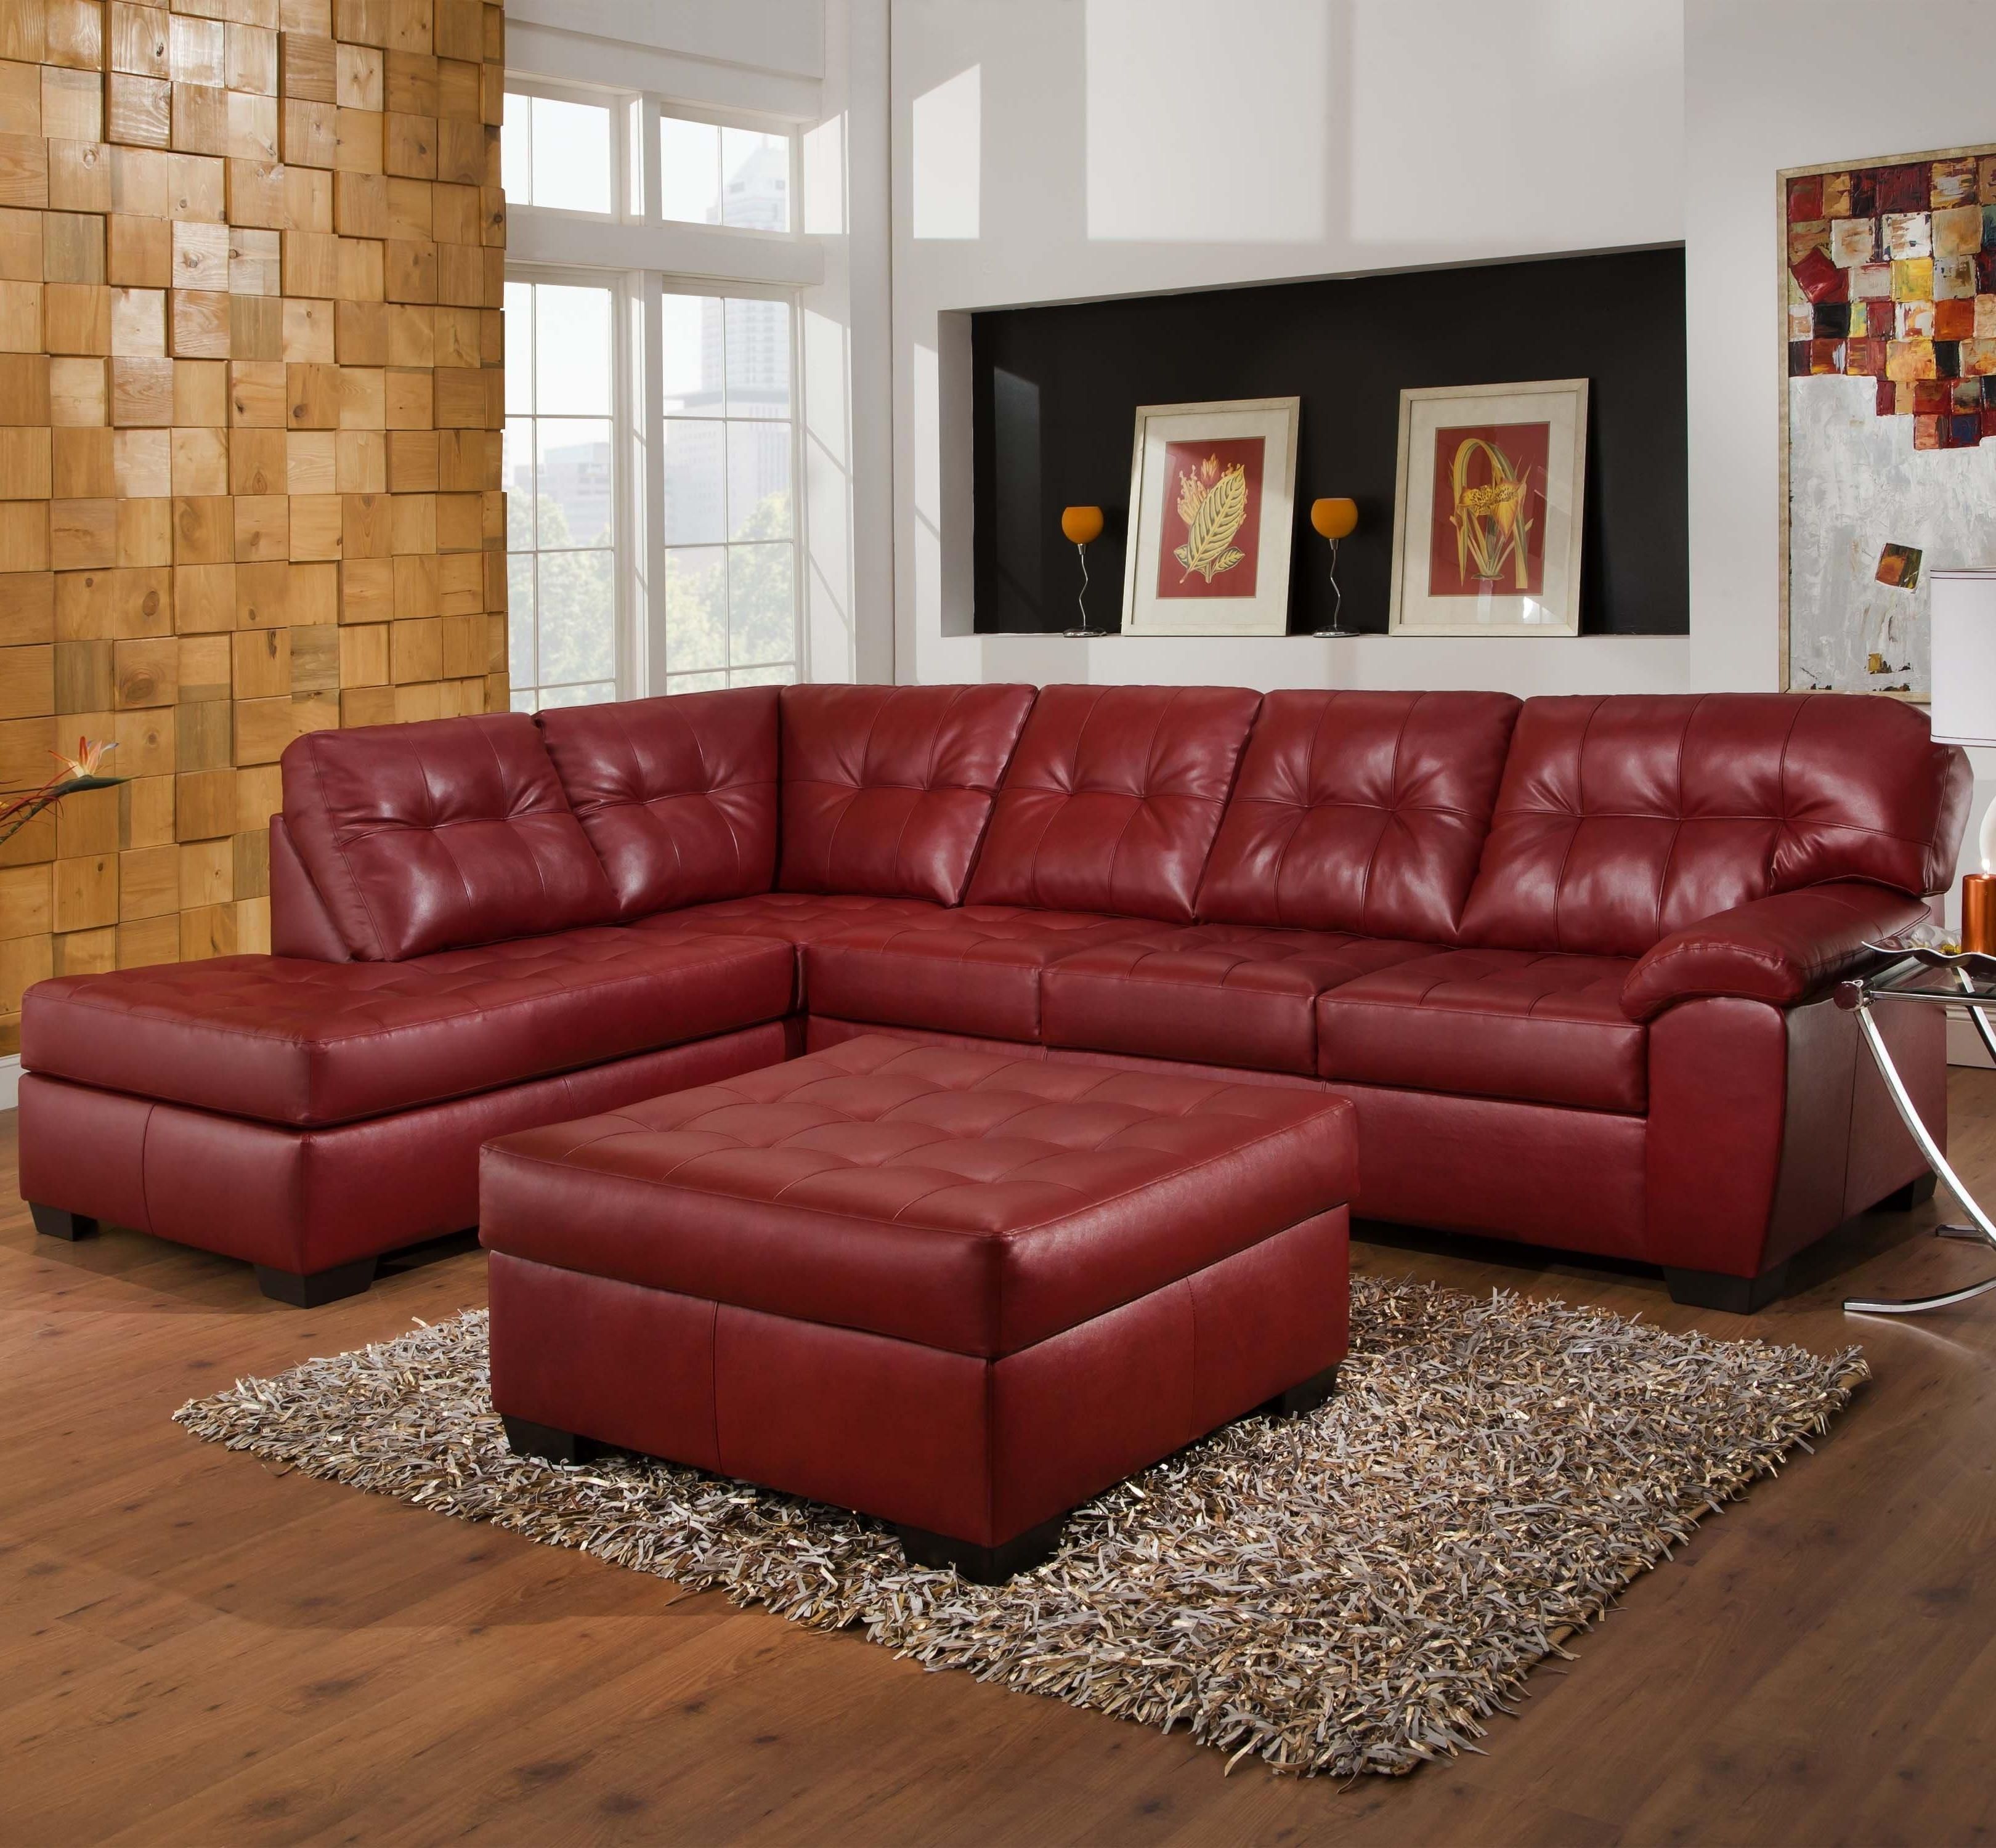 Most Up To Date 9569 2 Piece Sectional With Tufted Seats & Backsimmons With Regard To Knoxville Tn Sectional Sofas (View 13 of 20)